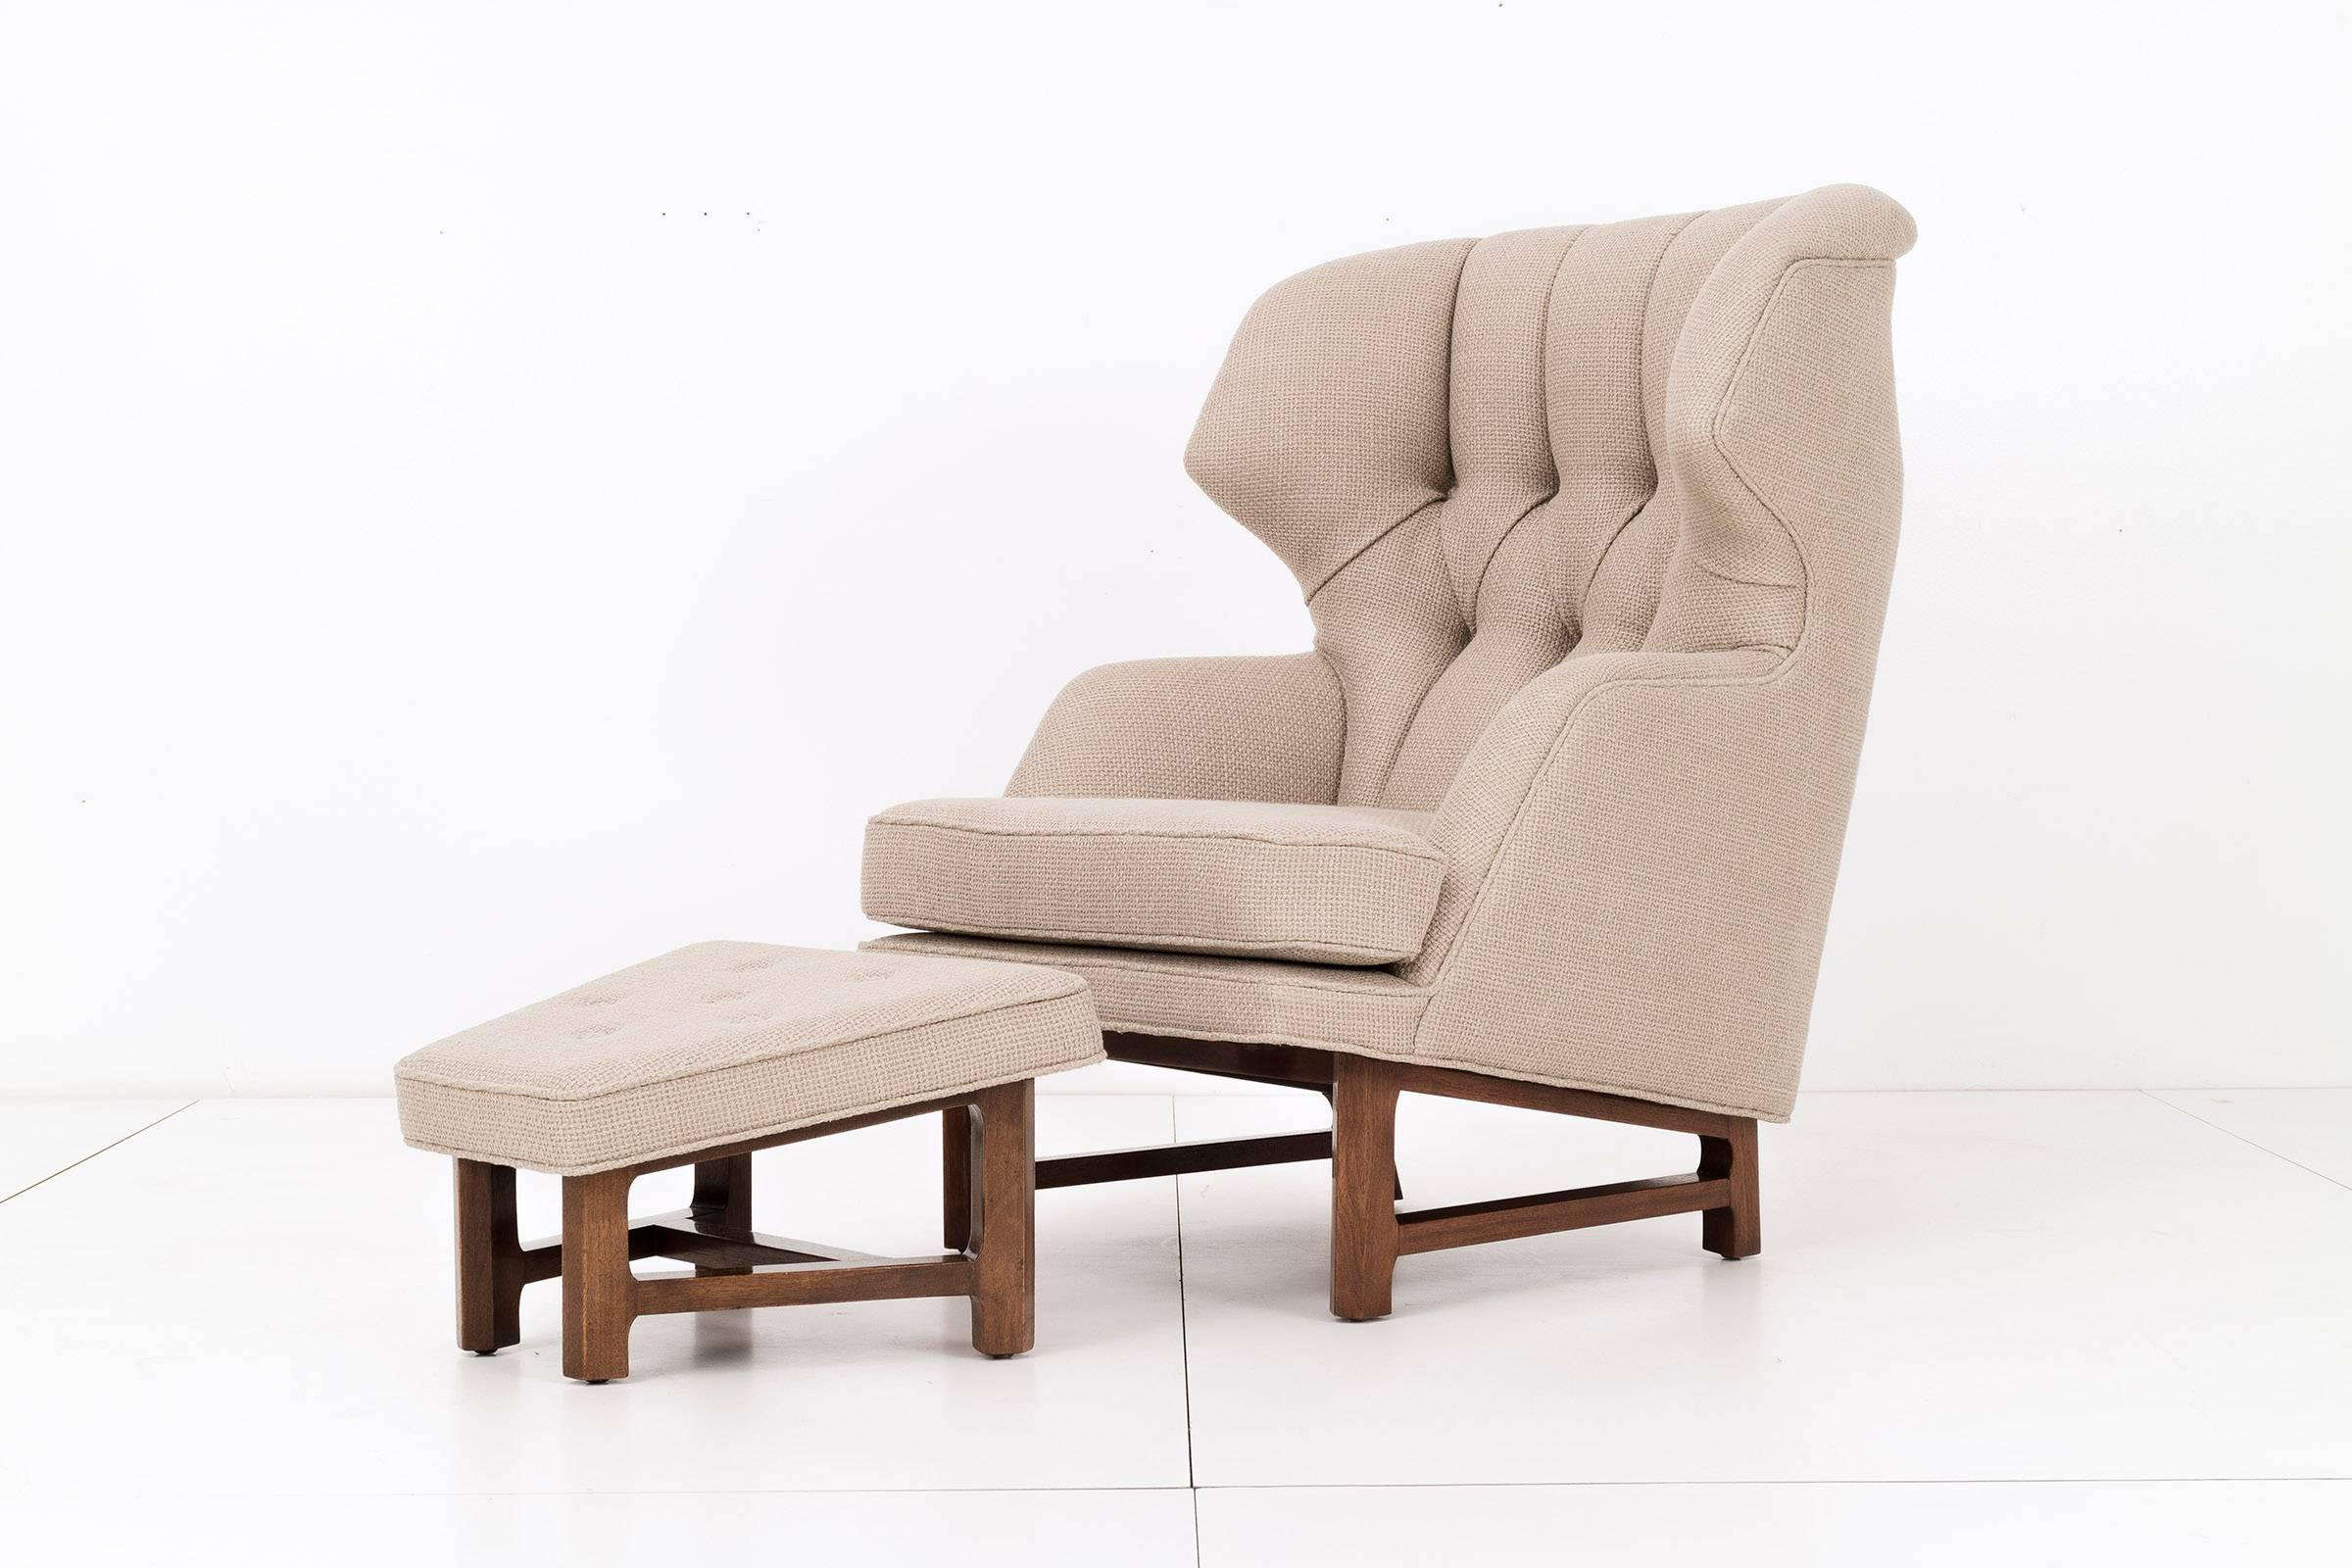 Wingback lounge chair and ottoman designed by Edward Wormley for Dunbar.
Diamond tufted back, reupholstered with Great Plains high quality woven wool fabric.

Lounge chair measurements:
34 D x 30 W x 41 H x 18 SH in.

Ottoman measurements:
18